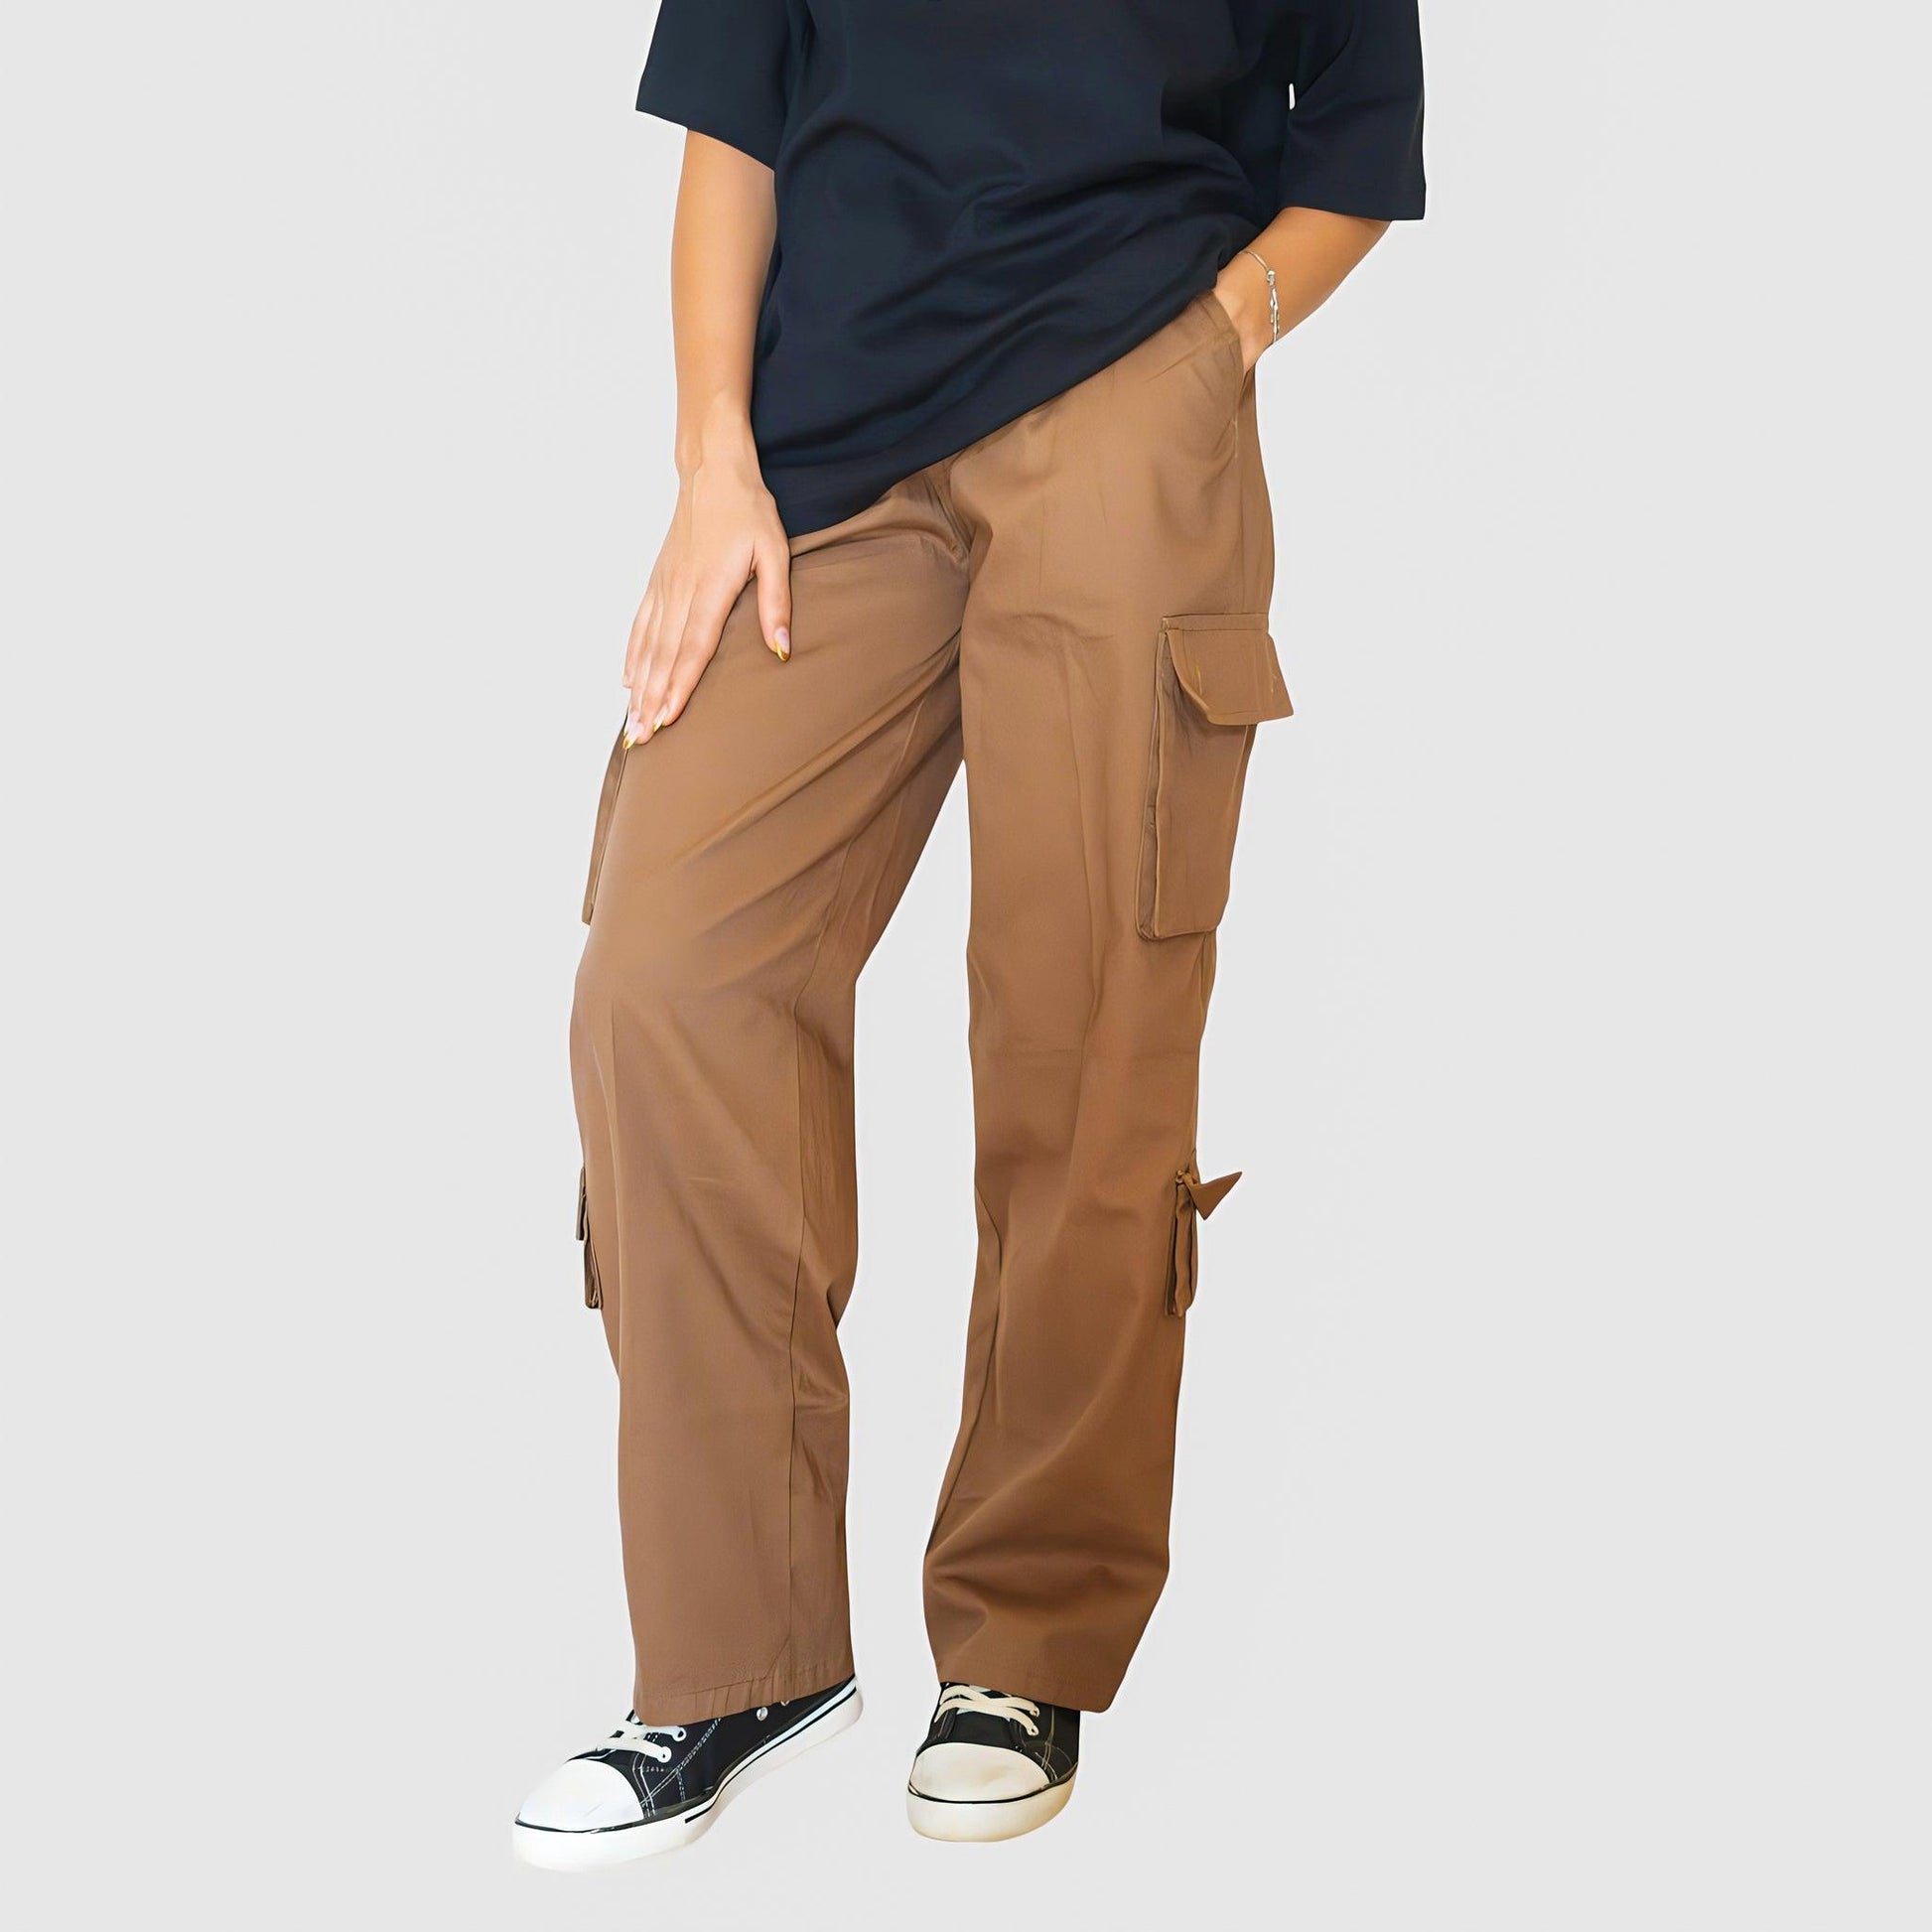 Brown Unisex Relaxed Fit Cargo 8 pockets - Loopster